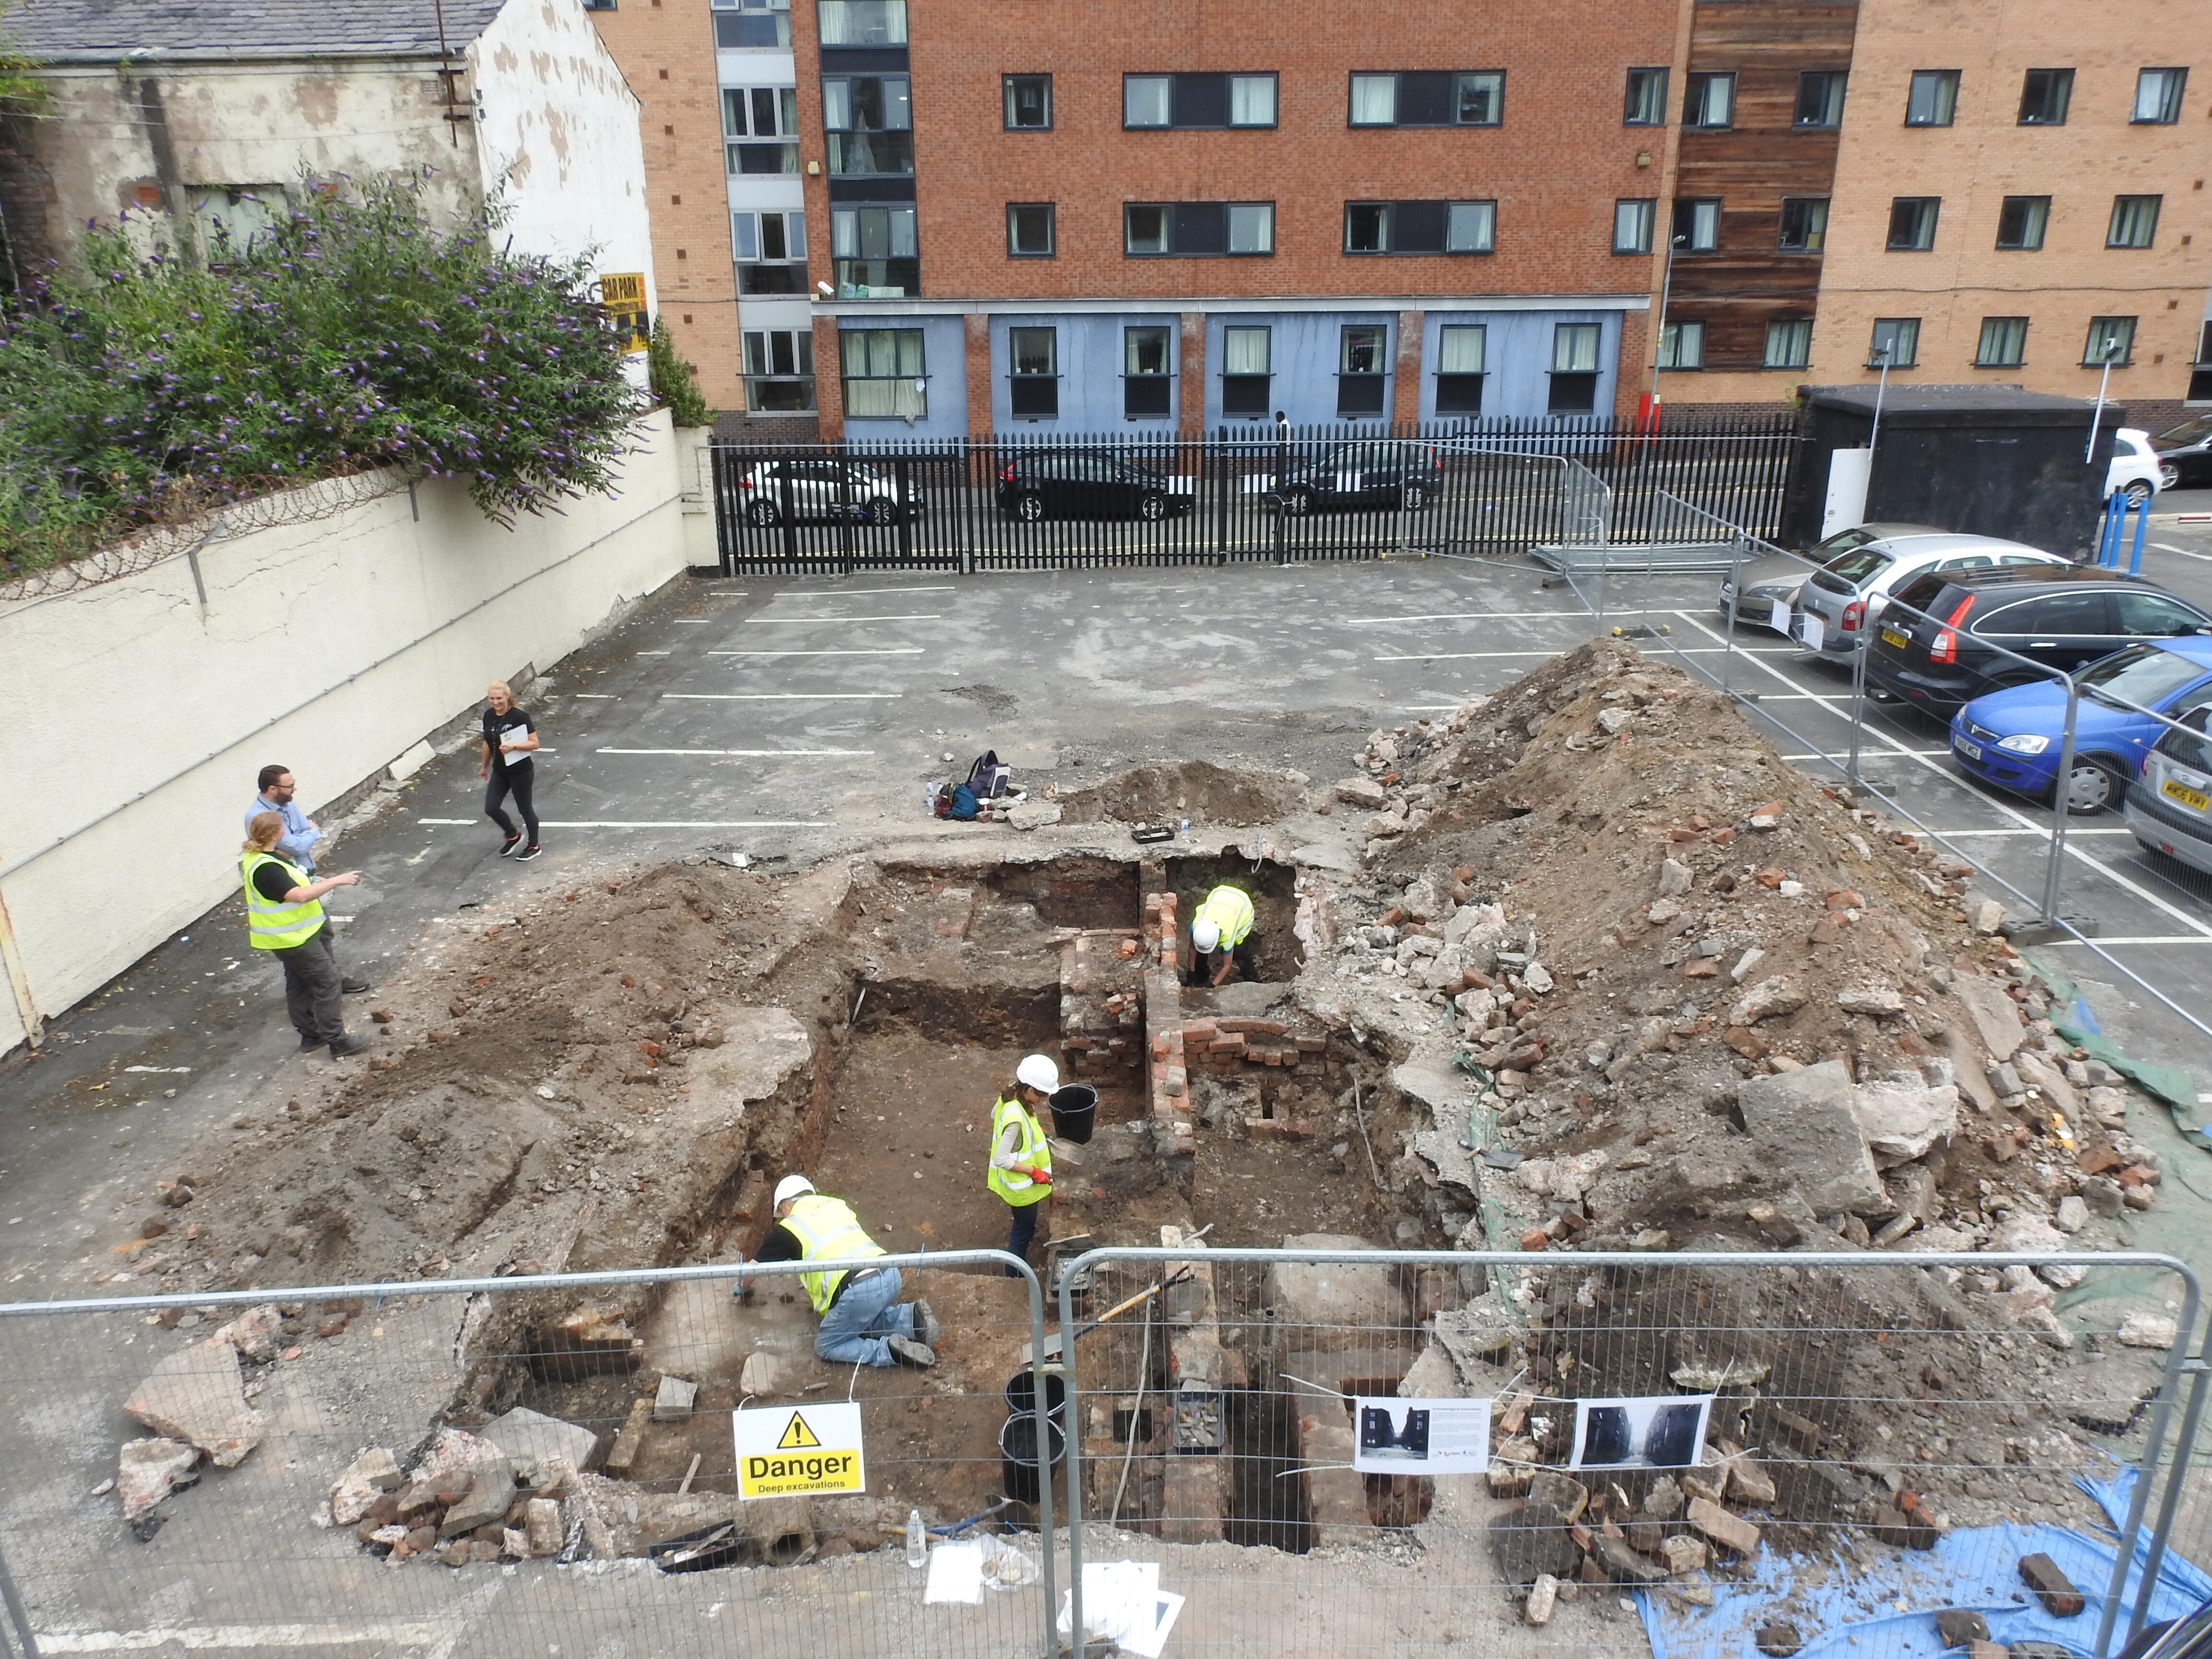 The excavation site at LSTM's Oakes Street car park in 2018